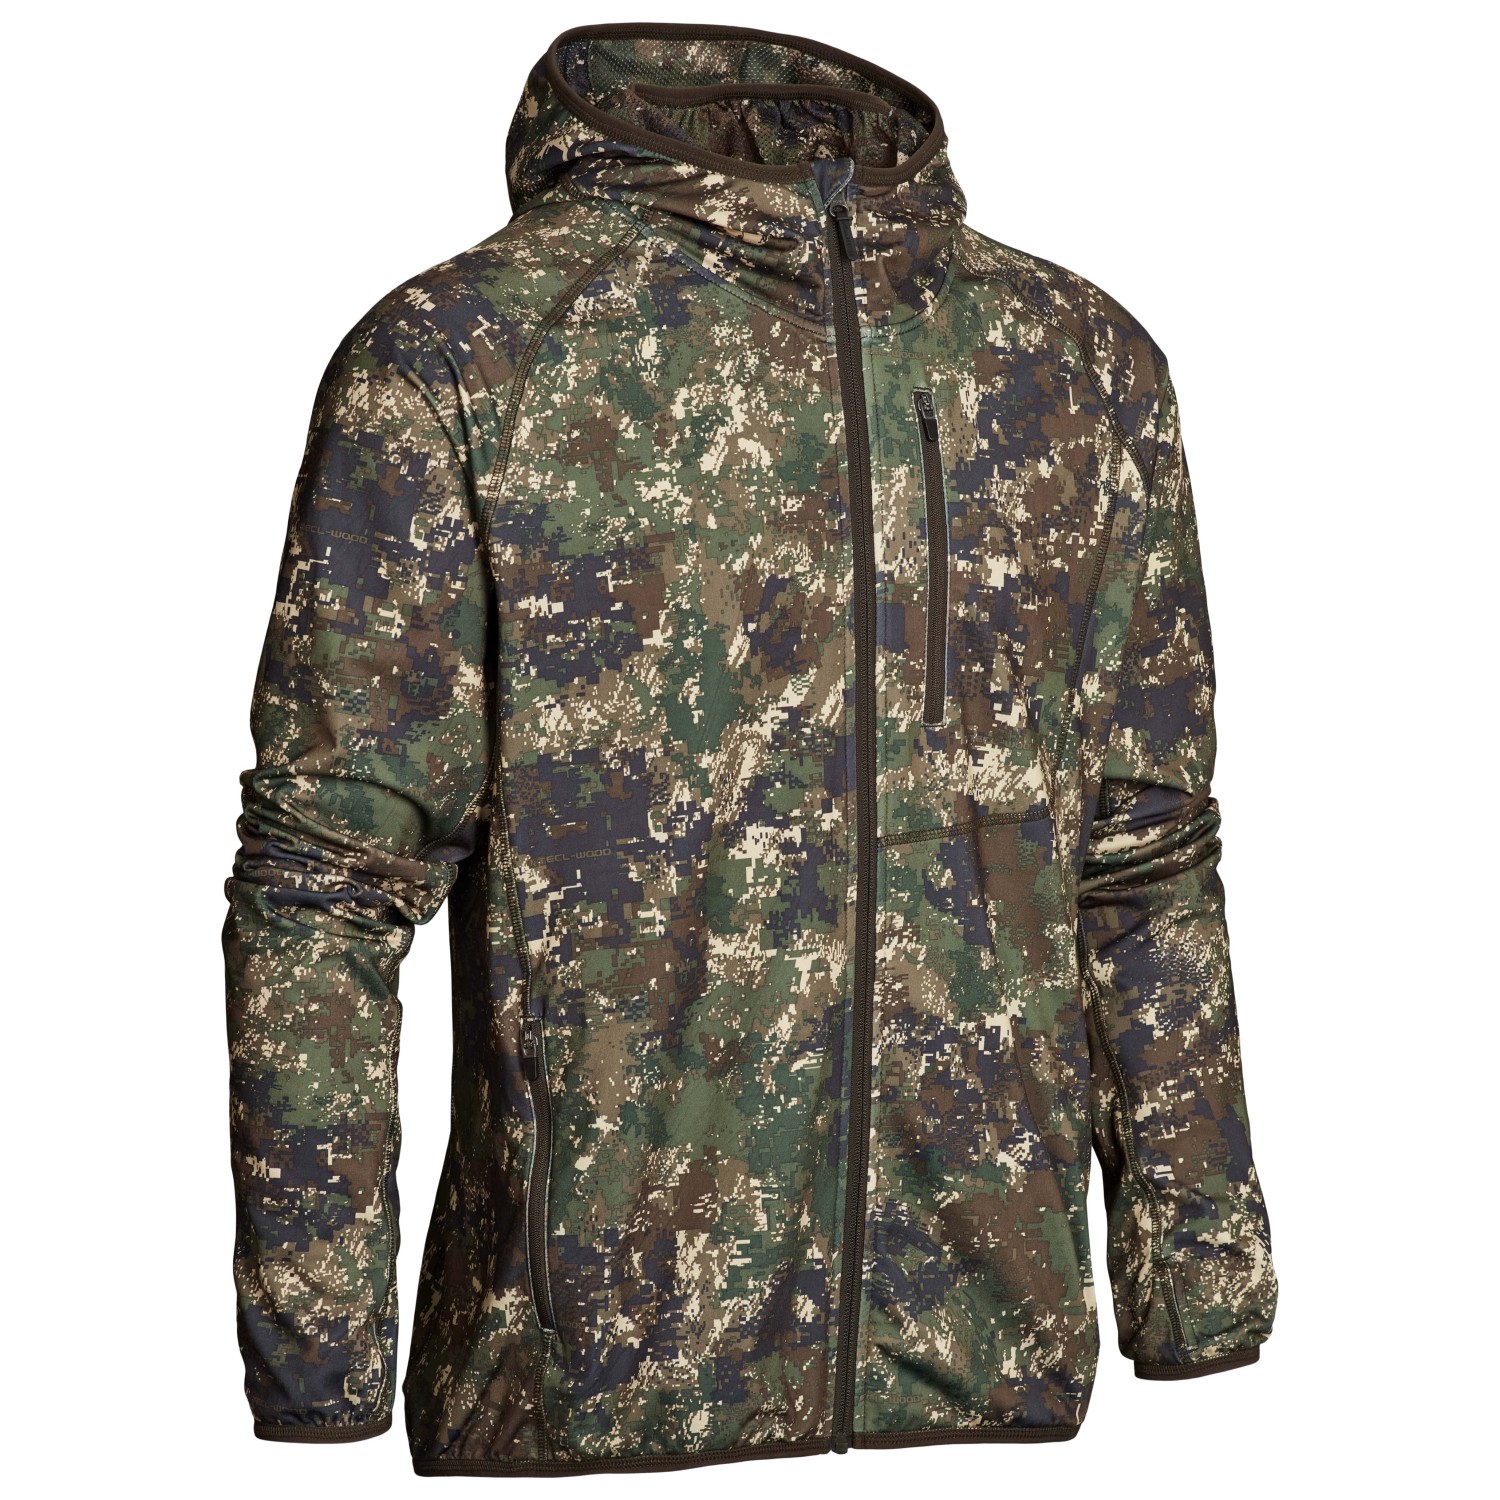 Куртка из софтшелла Northern Hunting Alvar, цвет Camouflage Opt 2 camouflage clothing menswear military tactics of autumn winter clothes outdoors hunting camouflage uniform